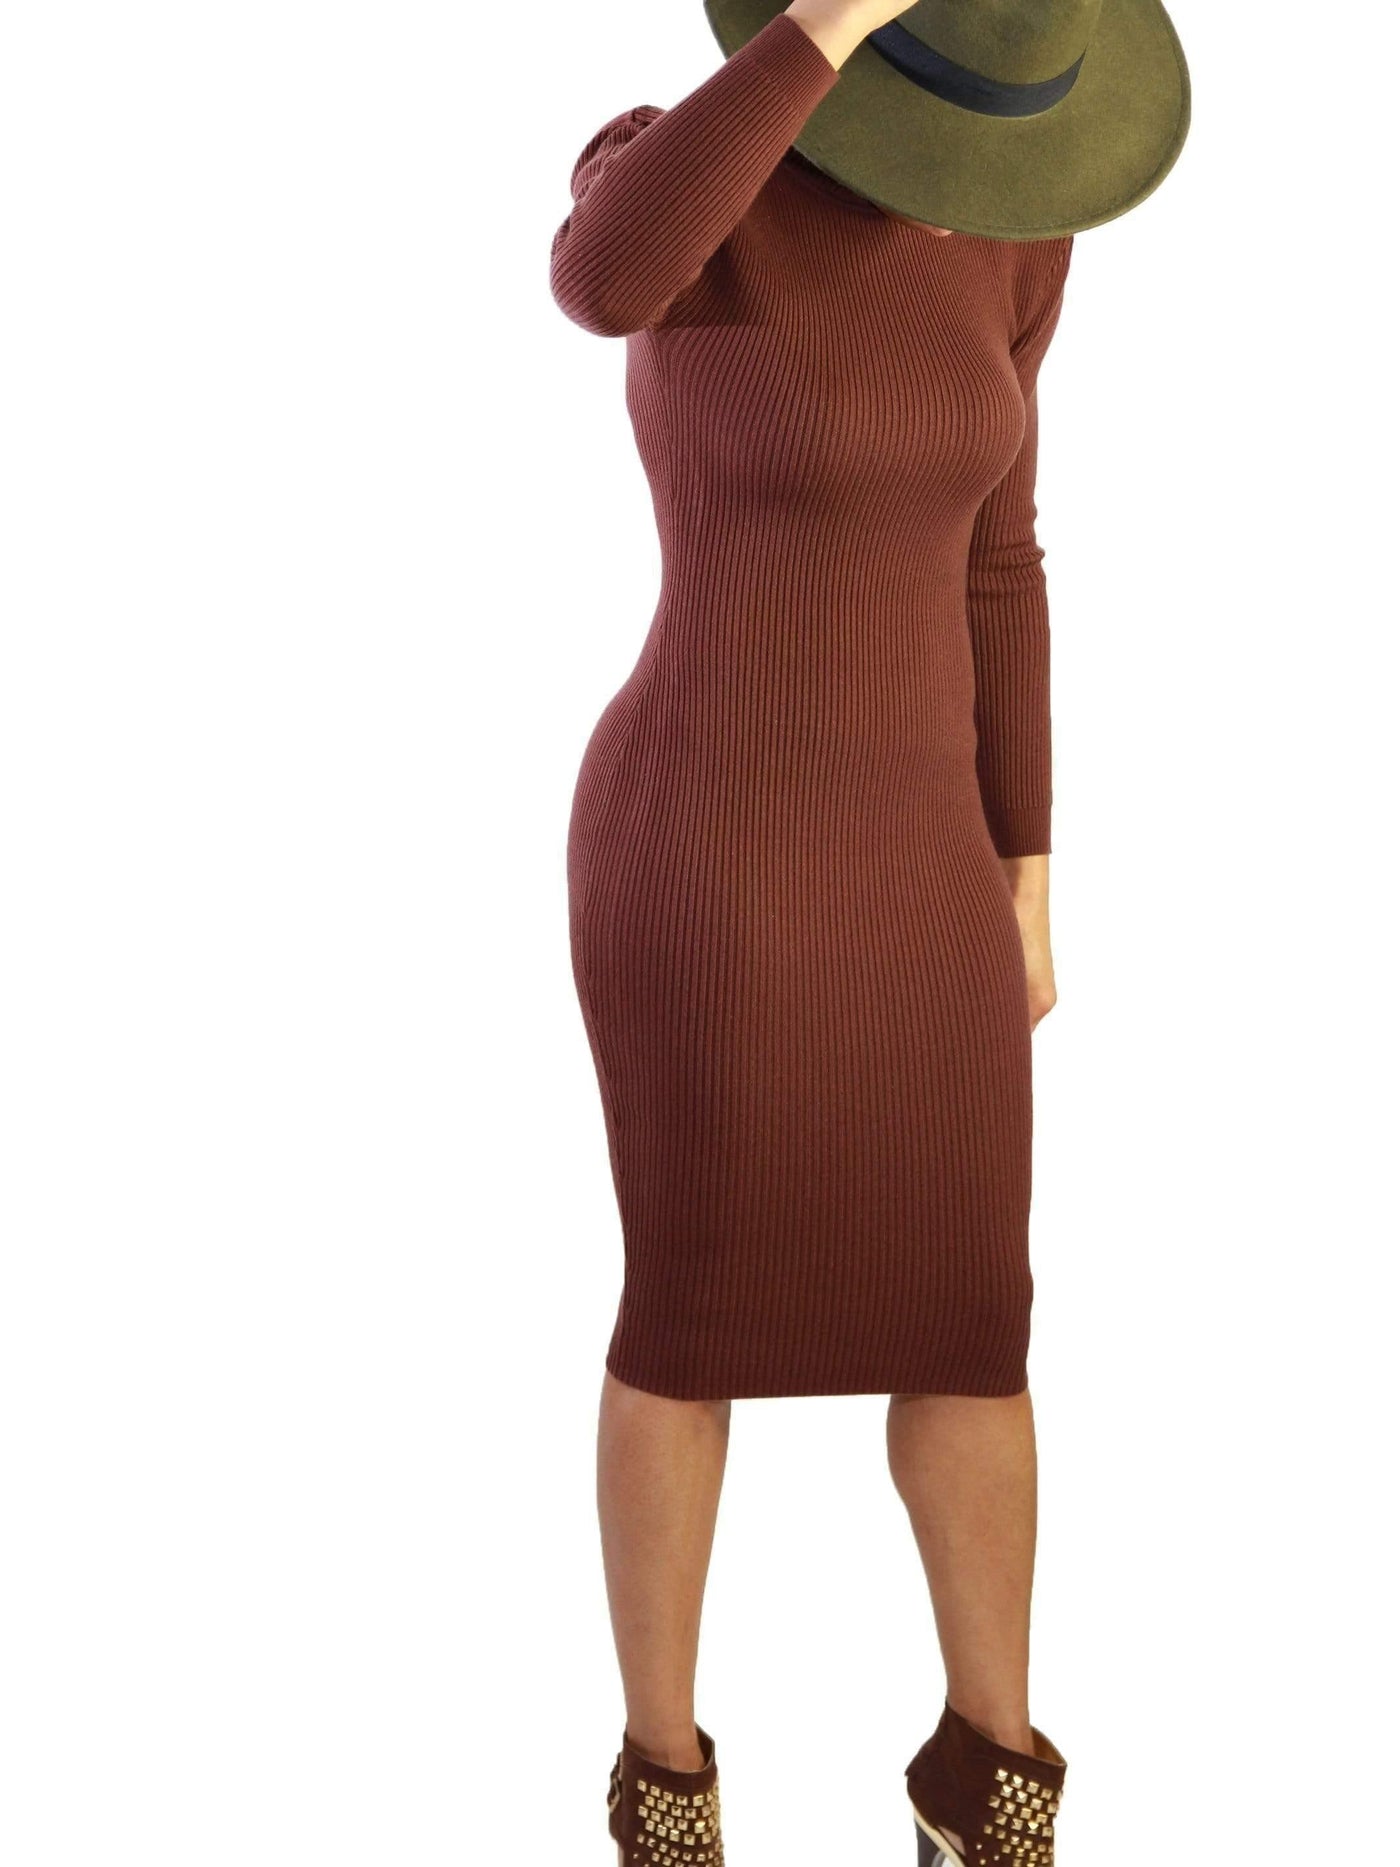 She Won | Ribbed Sweater Dress - Statement Piece NY _tab_size-chart, Brooklyn Boutique, Brown, dress, Dresses, Fall, Fall Fashion, Long Sleeve, Midi Dress, Misses, not clearance, Ships from USA, SPNY Exclusive, Standard Fall, statement, Statement Clothing, statement dress, statement piece, Statement Piece Boutique, statement piece ny, Statement Pieces, Statement Pieces Boutique, Sweater, sweater dress, Women's Boutique Statement Dresses/Jumpsuits